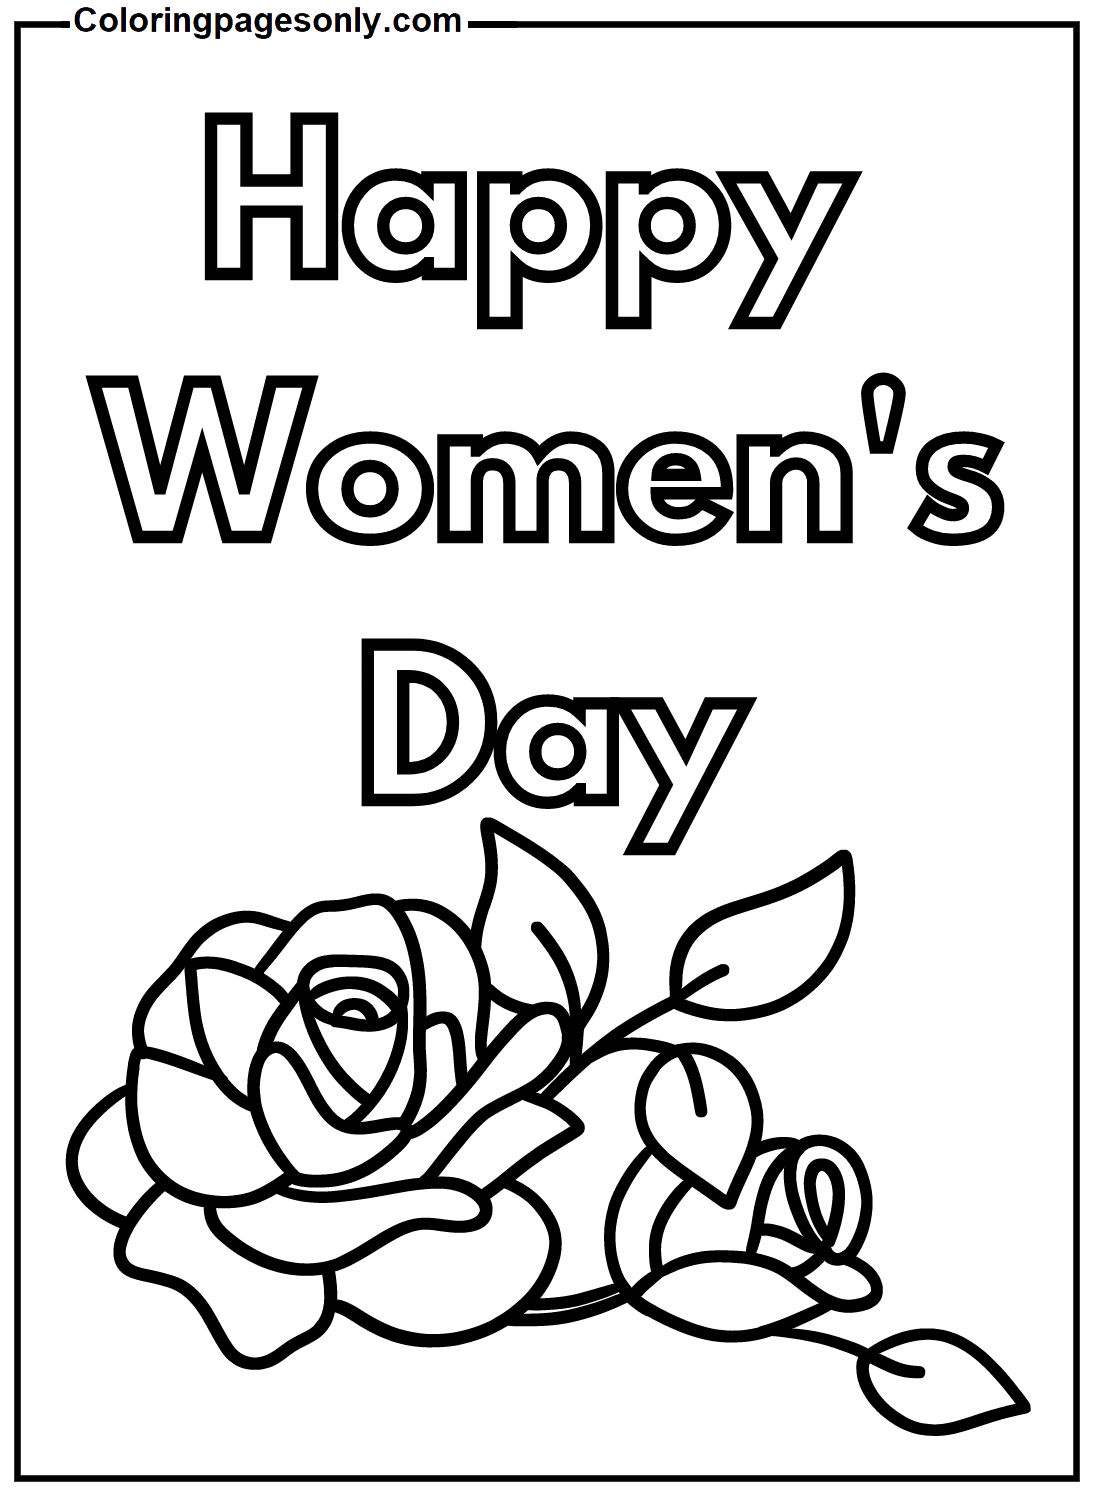 Happy Women's Day Picture Coloring Pages